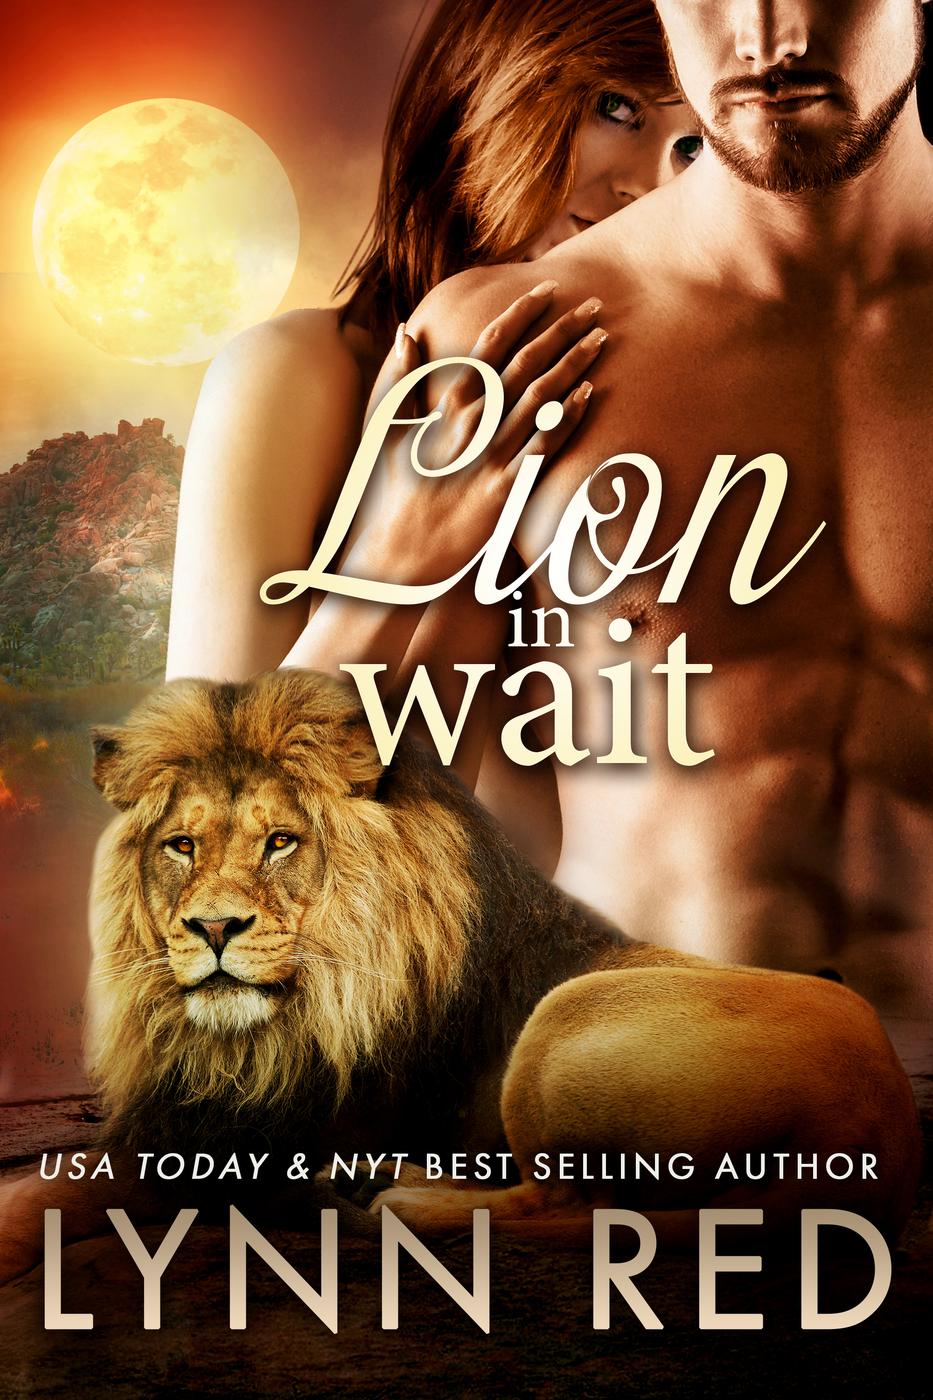 Lion In Wait (A Paranormal Alpha Lion Romance) (2014) by Lynn Red